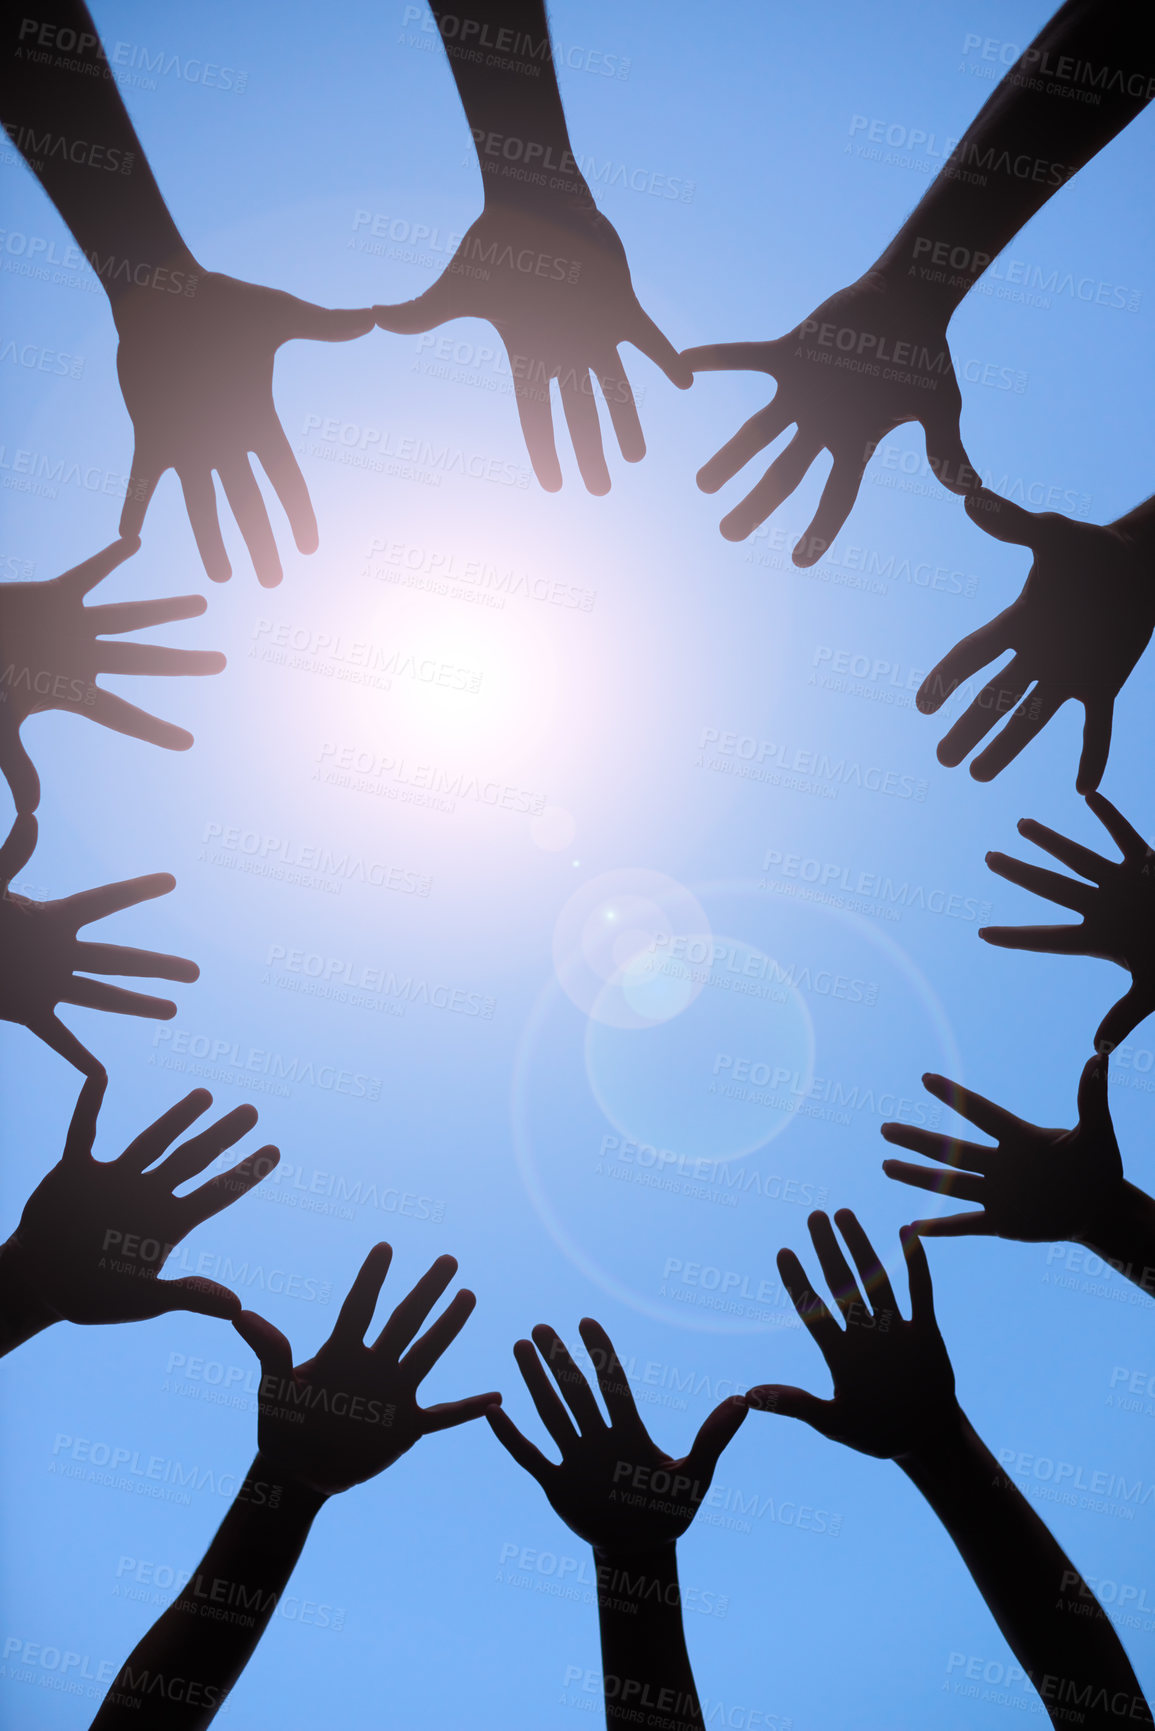 Buy stock photo Hands, together or circle with blue sky for diversity, community and collaboration. Group, arms up and palms out with summer silhouette for unity, teamwork and trust between friends or colleagues